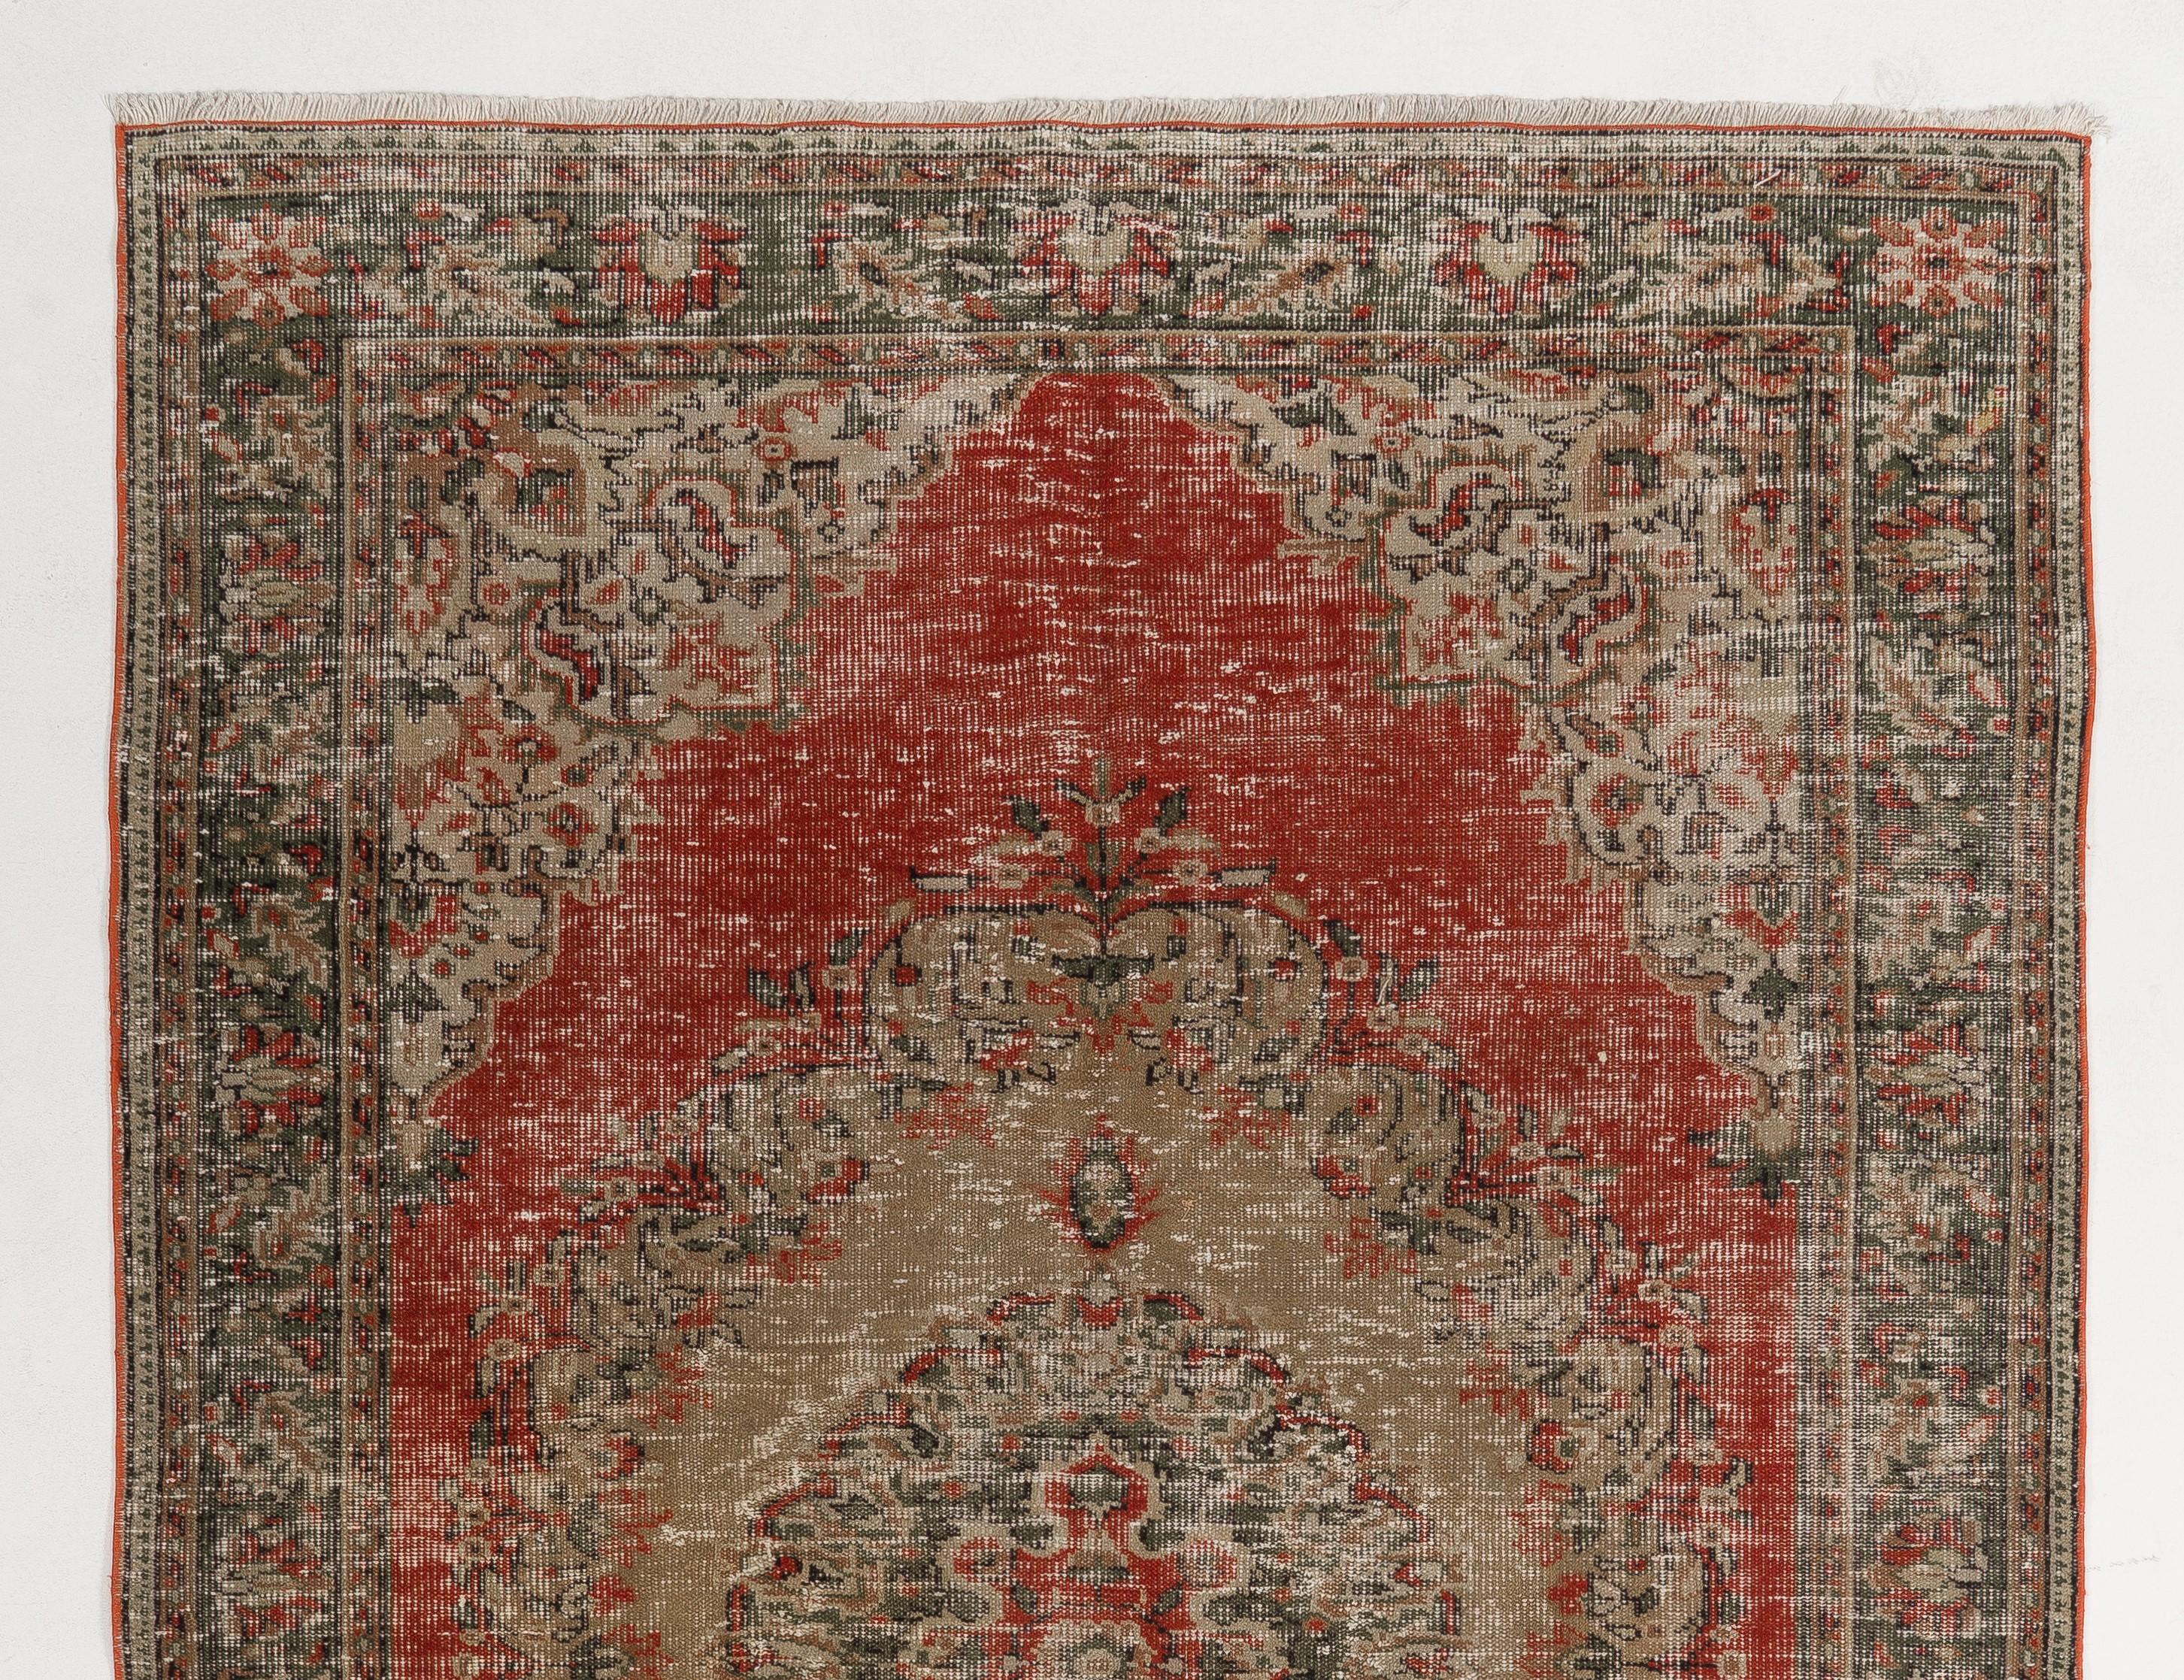 A vintage hand-knotted Turkish rug with a distressed, antiquated looking texture and a medallion design against a bright madder red field, surrounded by spandrels and an outer border filled with well-drawn rosettes, leafy and floral vines in pine